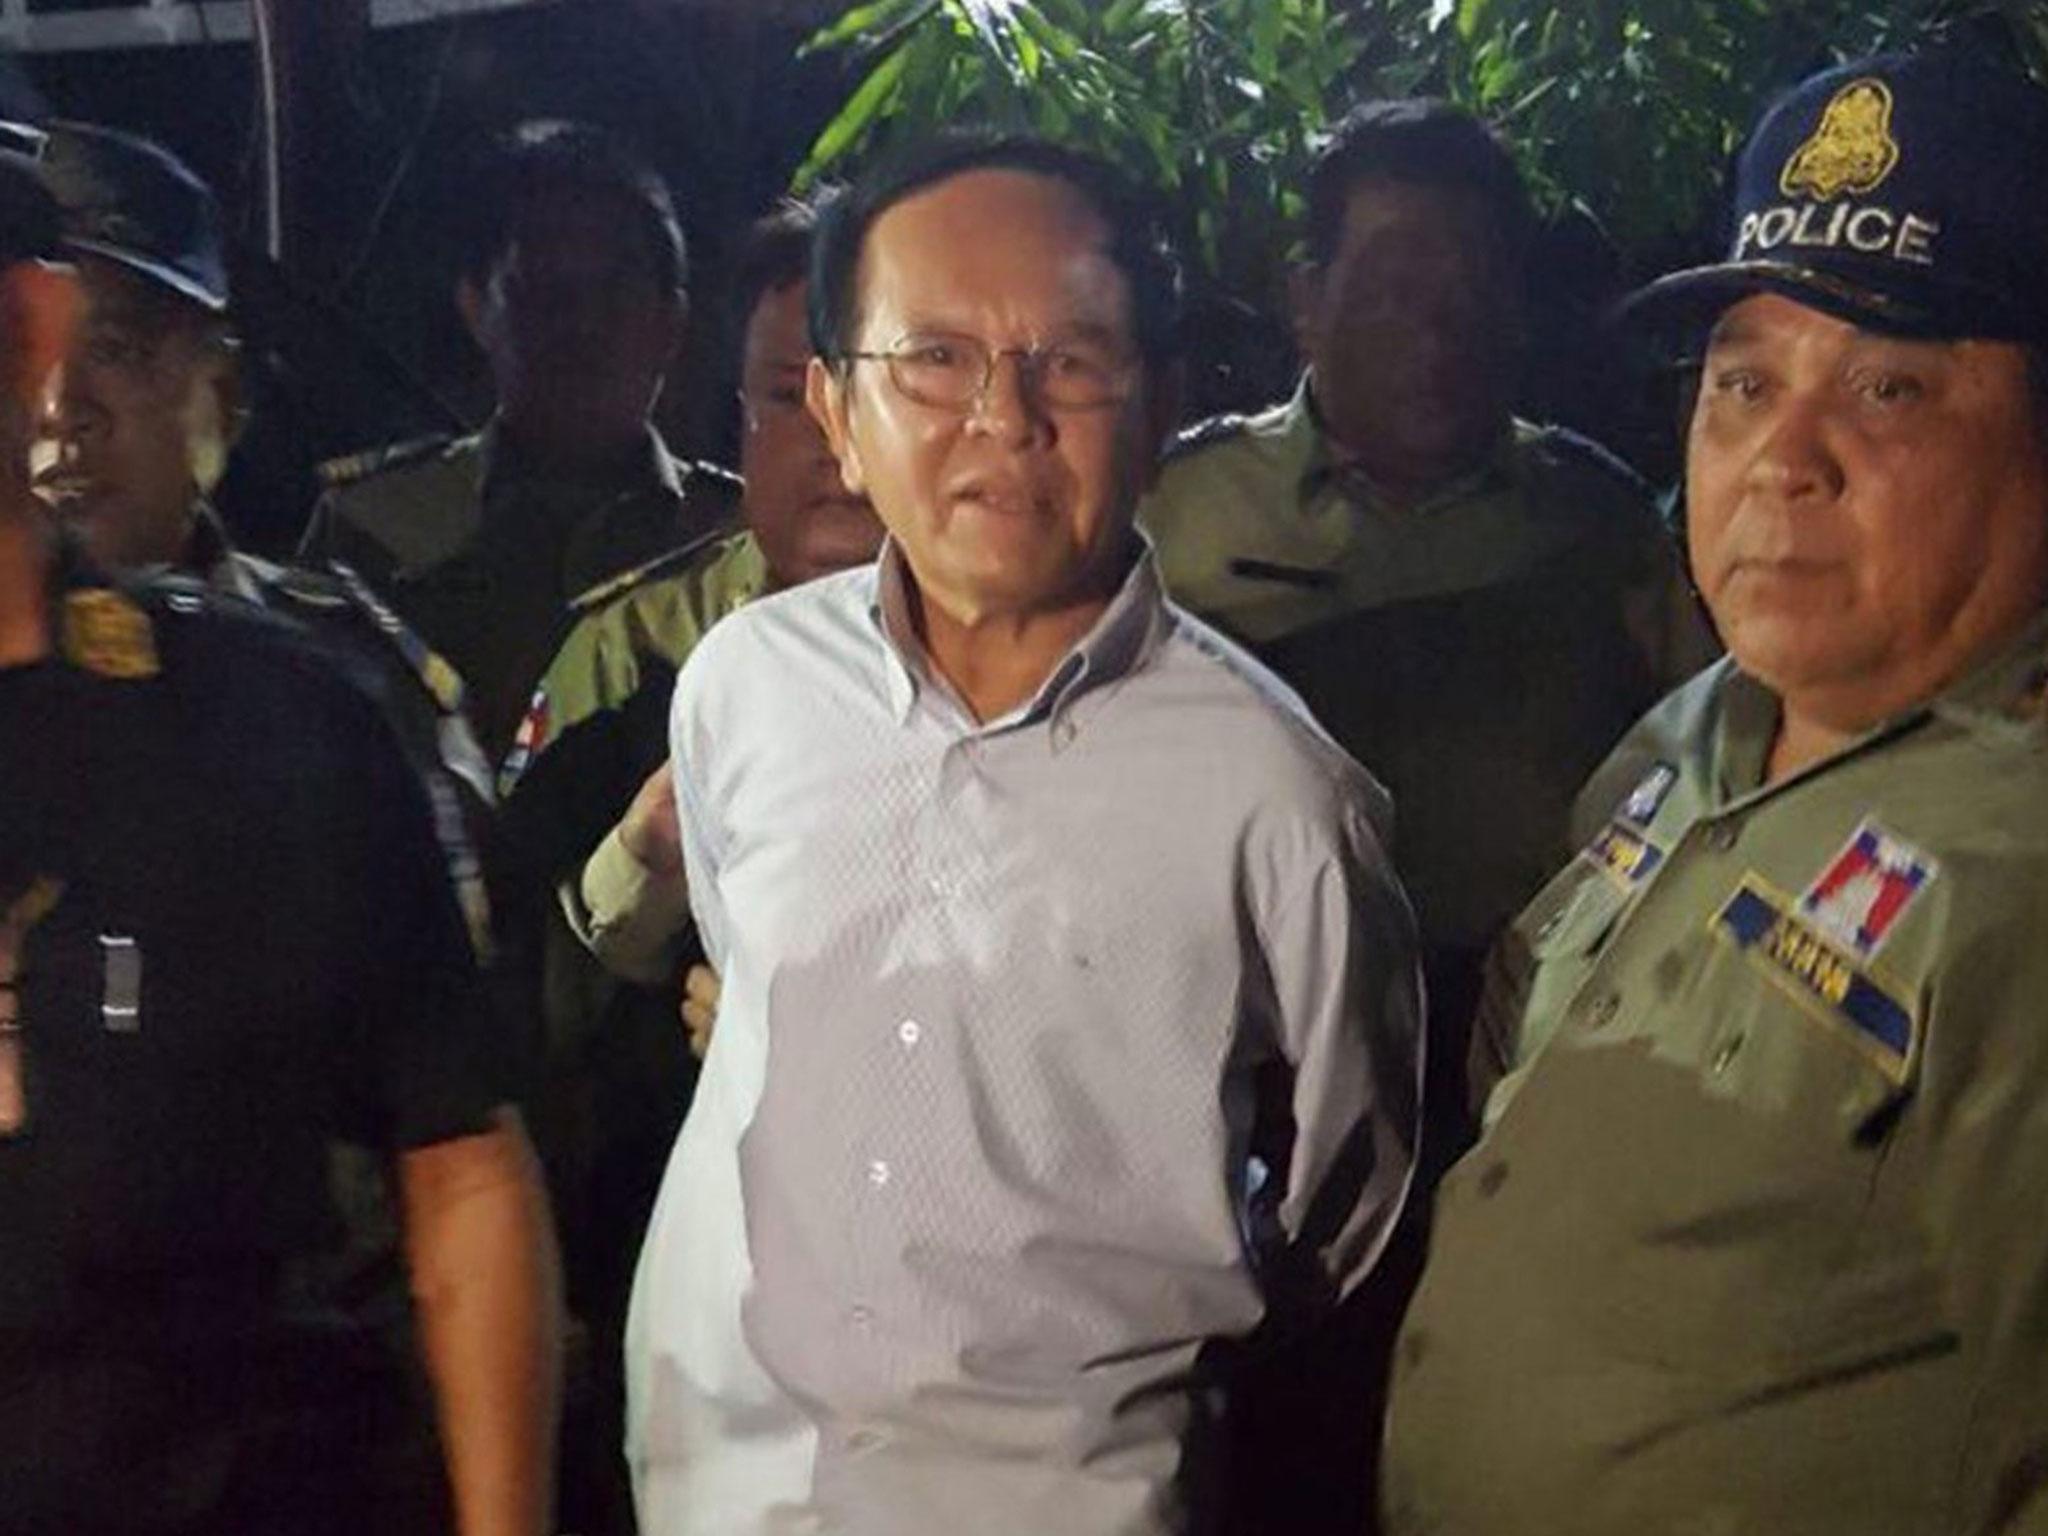 Cambodia's opposition leader Kem Sokha, 64, is detained during a police ride at his home in Phnom Penh, Cambodia